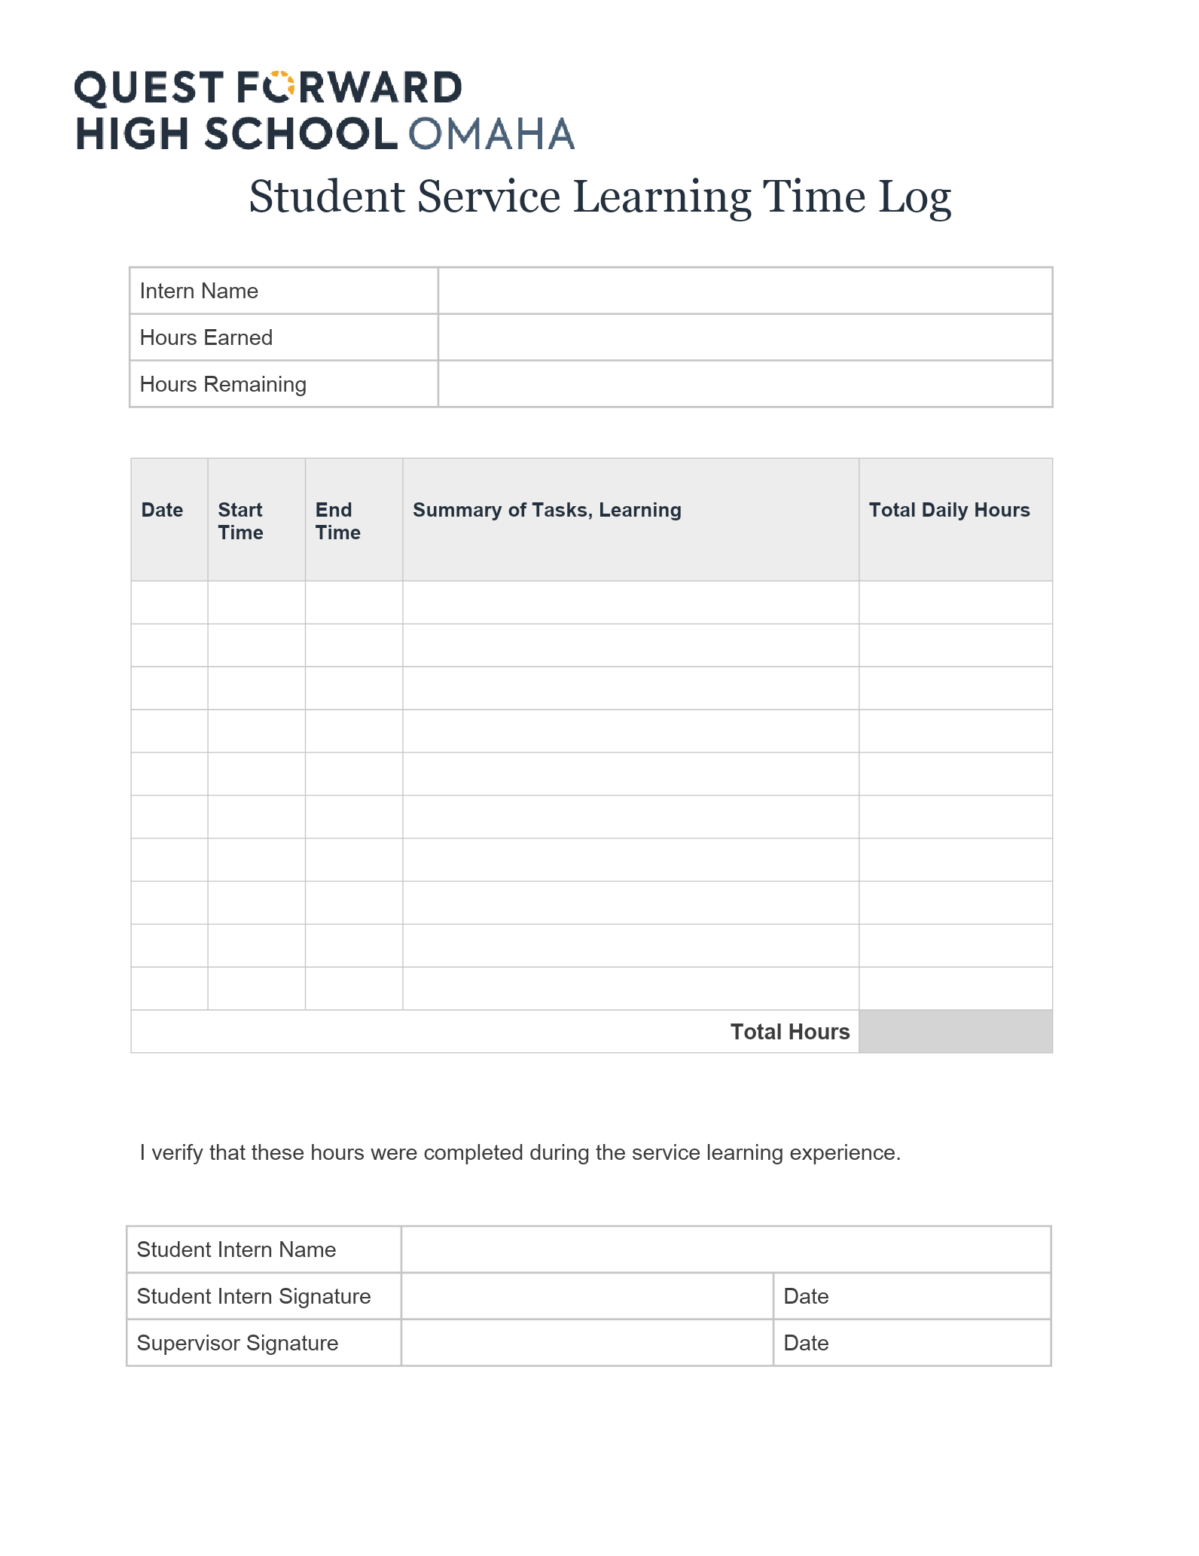 Student Service Learning Log